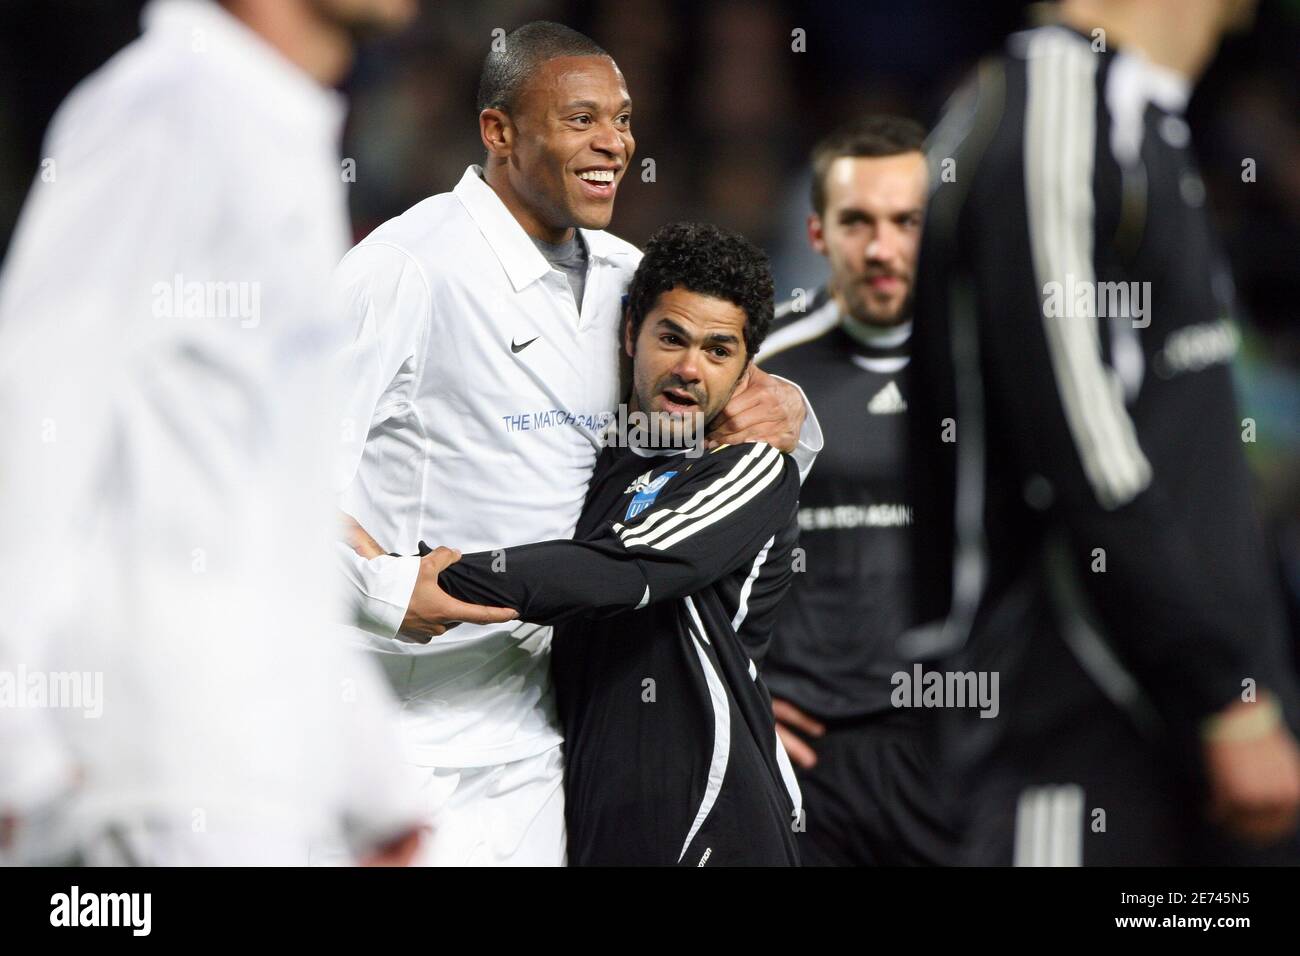 Julio Baptista and French humorist Jamel Debbouze fool around during the United Nations Development Program charity soccer match at the Velodrome stadium in Marseille, France on March 19, 2007. The Match Against Poverty aims for raise funds to fight poverty. Photo by Mehdi Taamallah/Cameleon/ABACAPRESS.COM Stock Photo